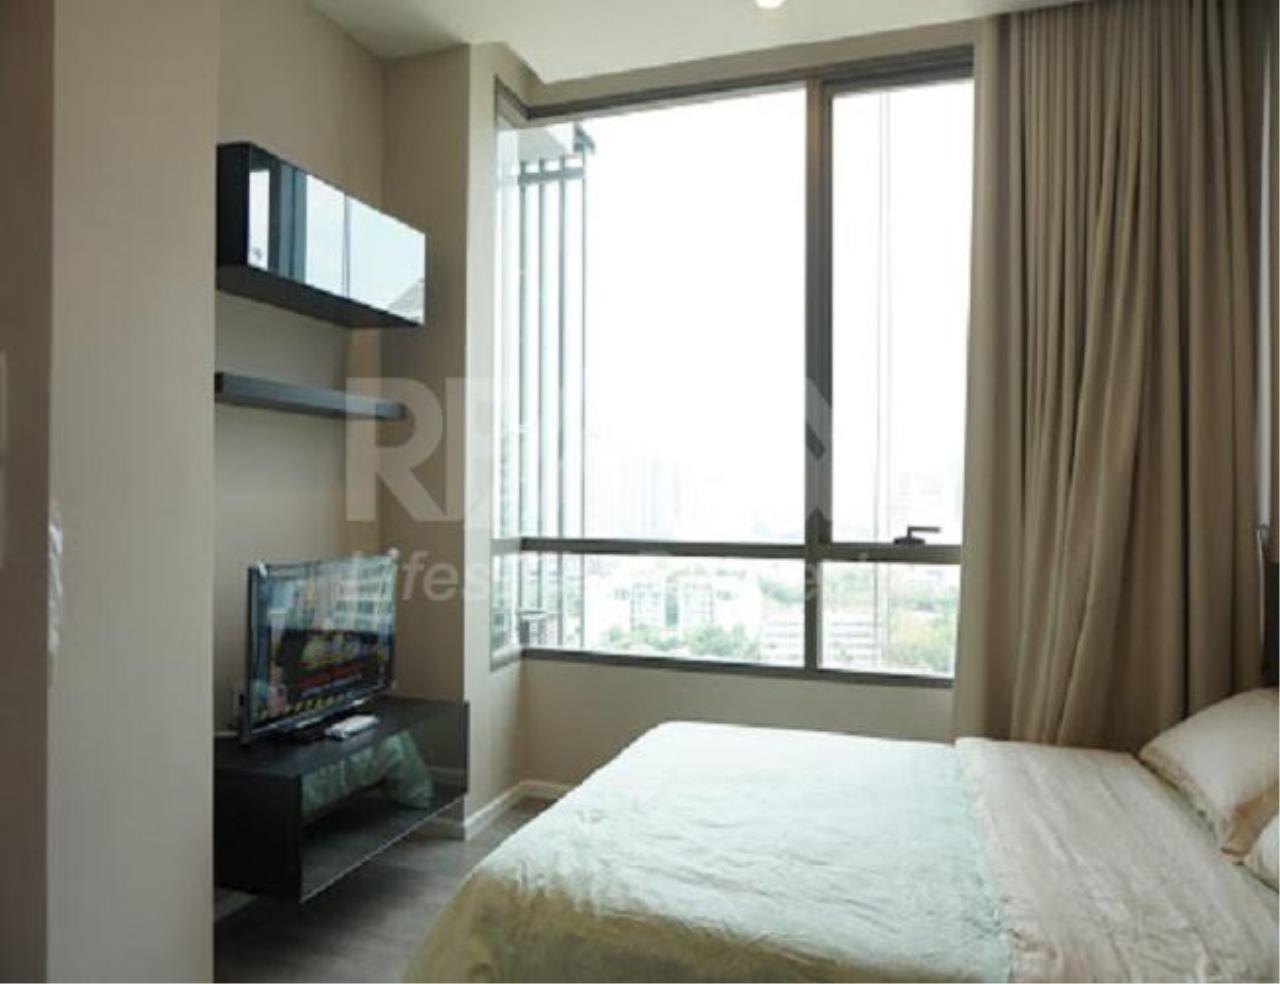 RE/MAX LifeStyle Property Agency's The Room Sukhumvit 69 8